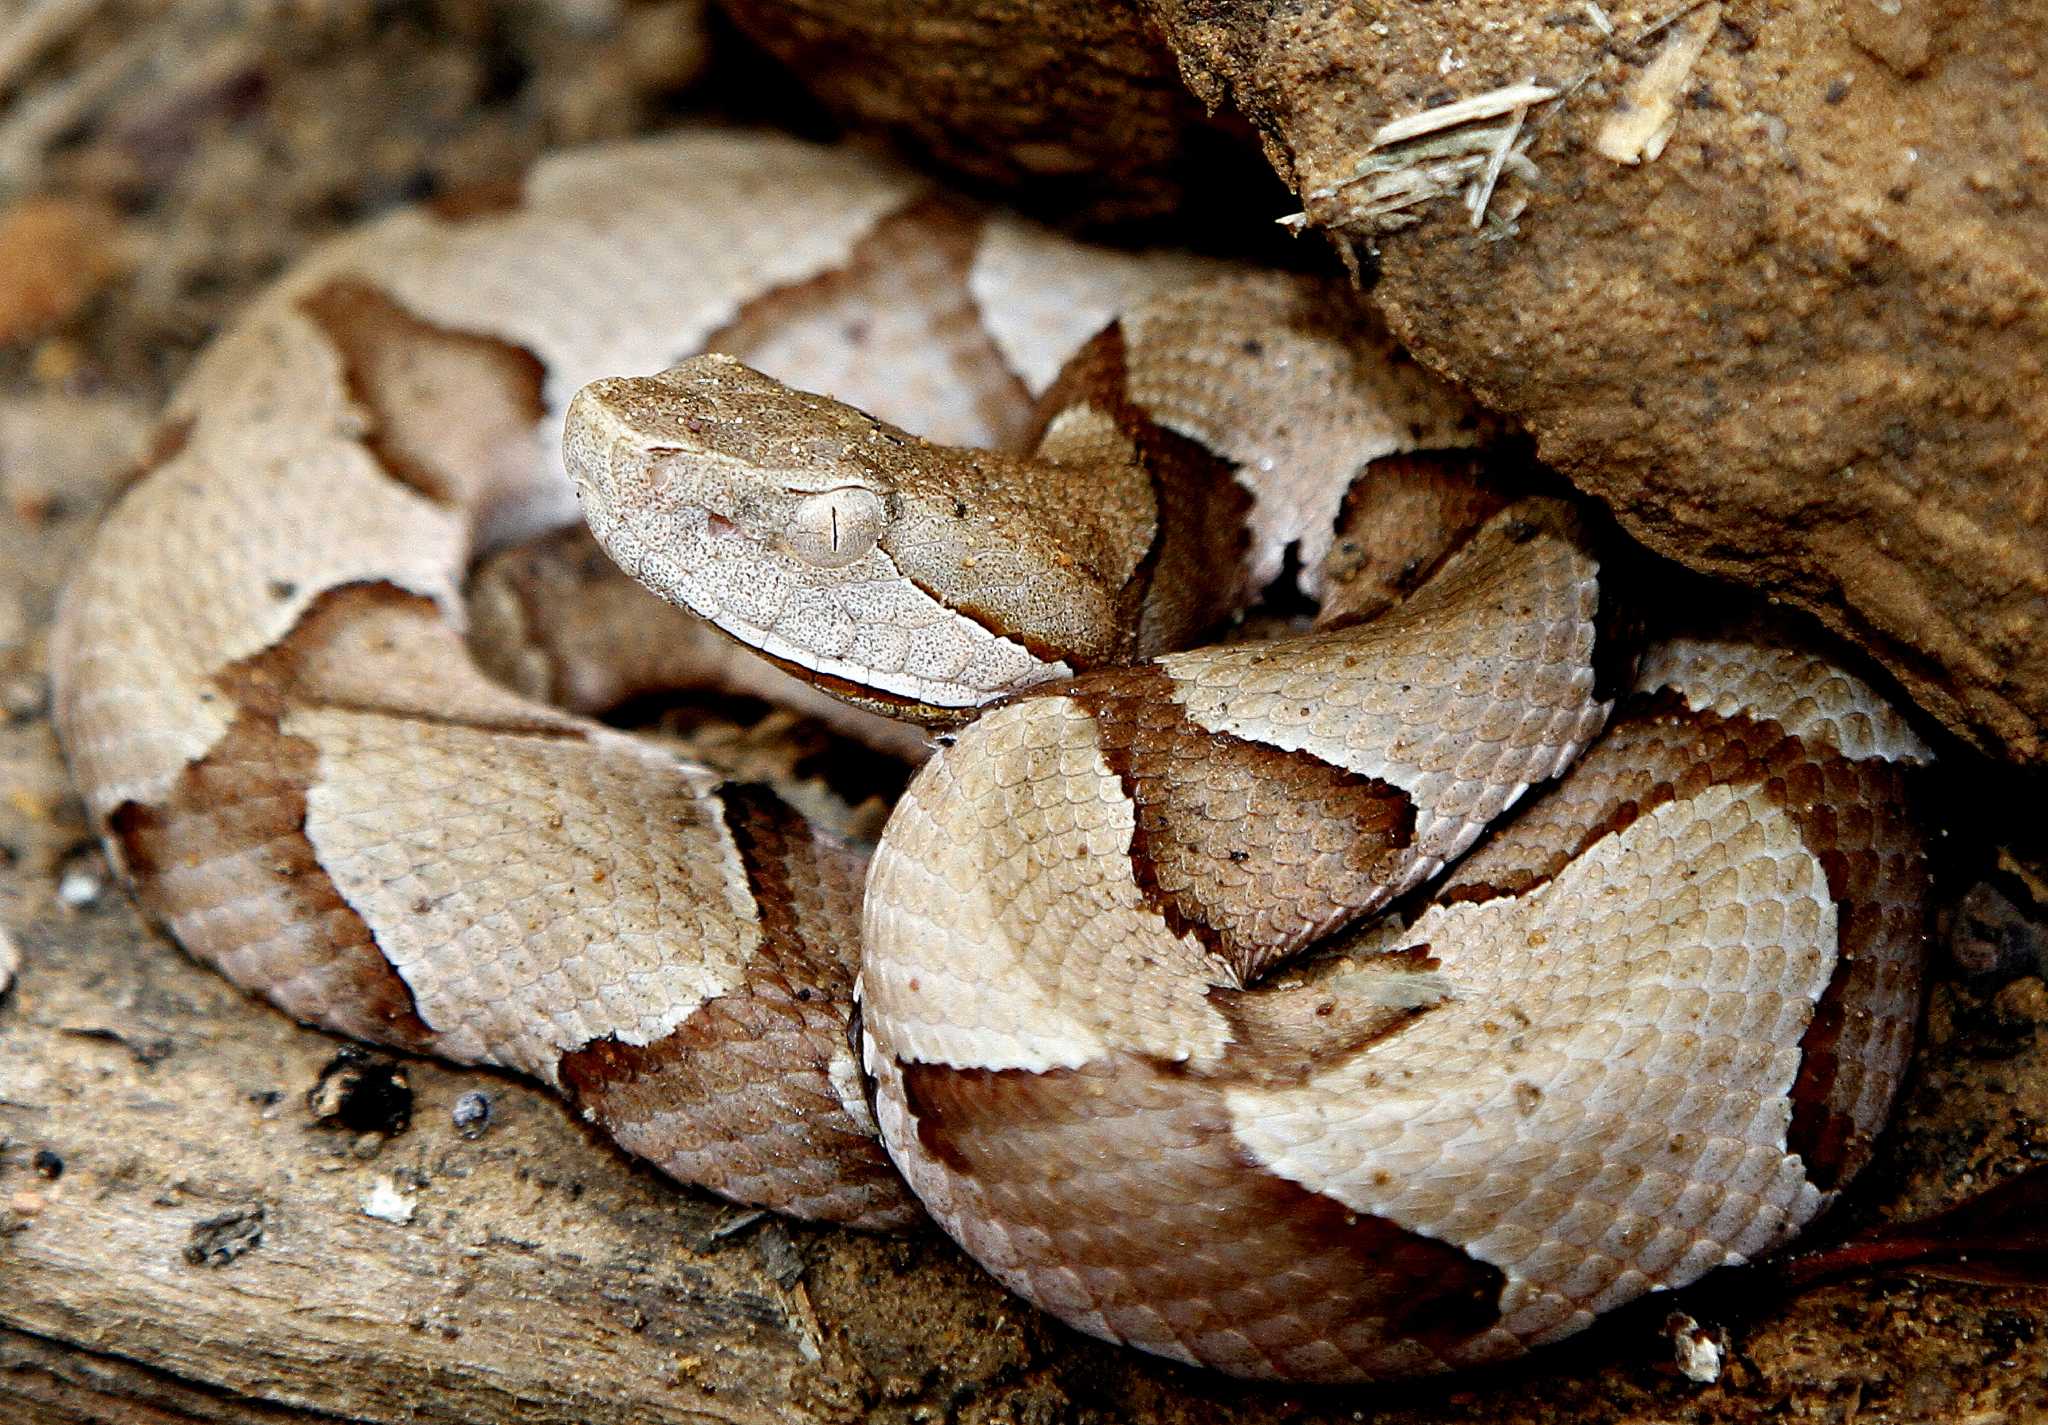 Copperhead snakes engage in nightly summertime feeding congregation - Houston Chronicle